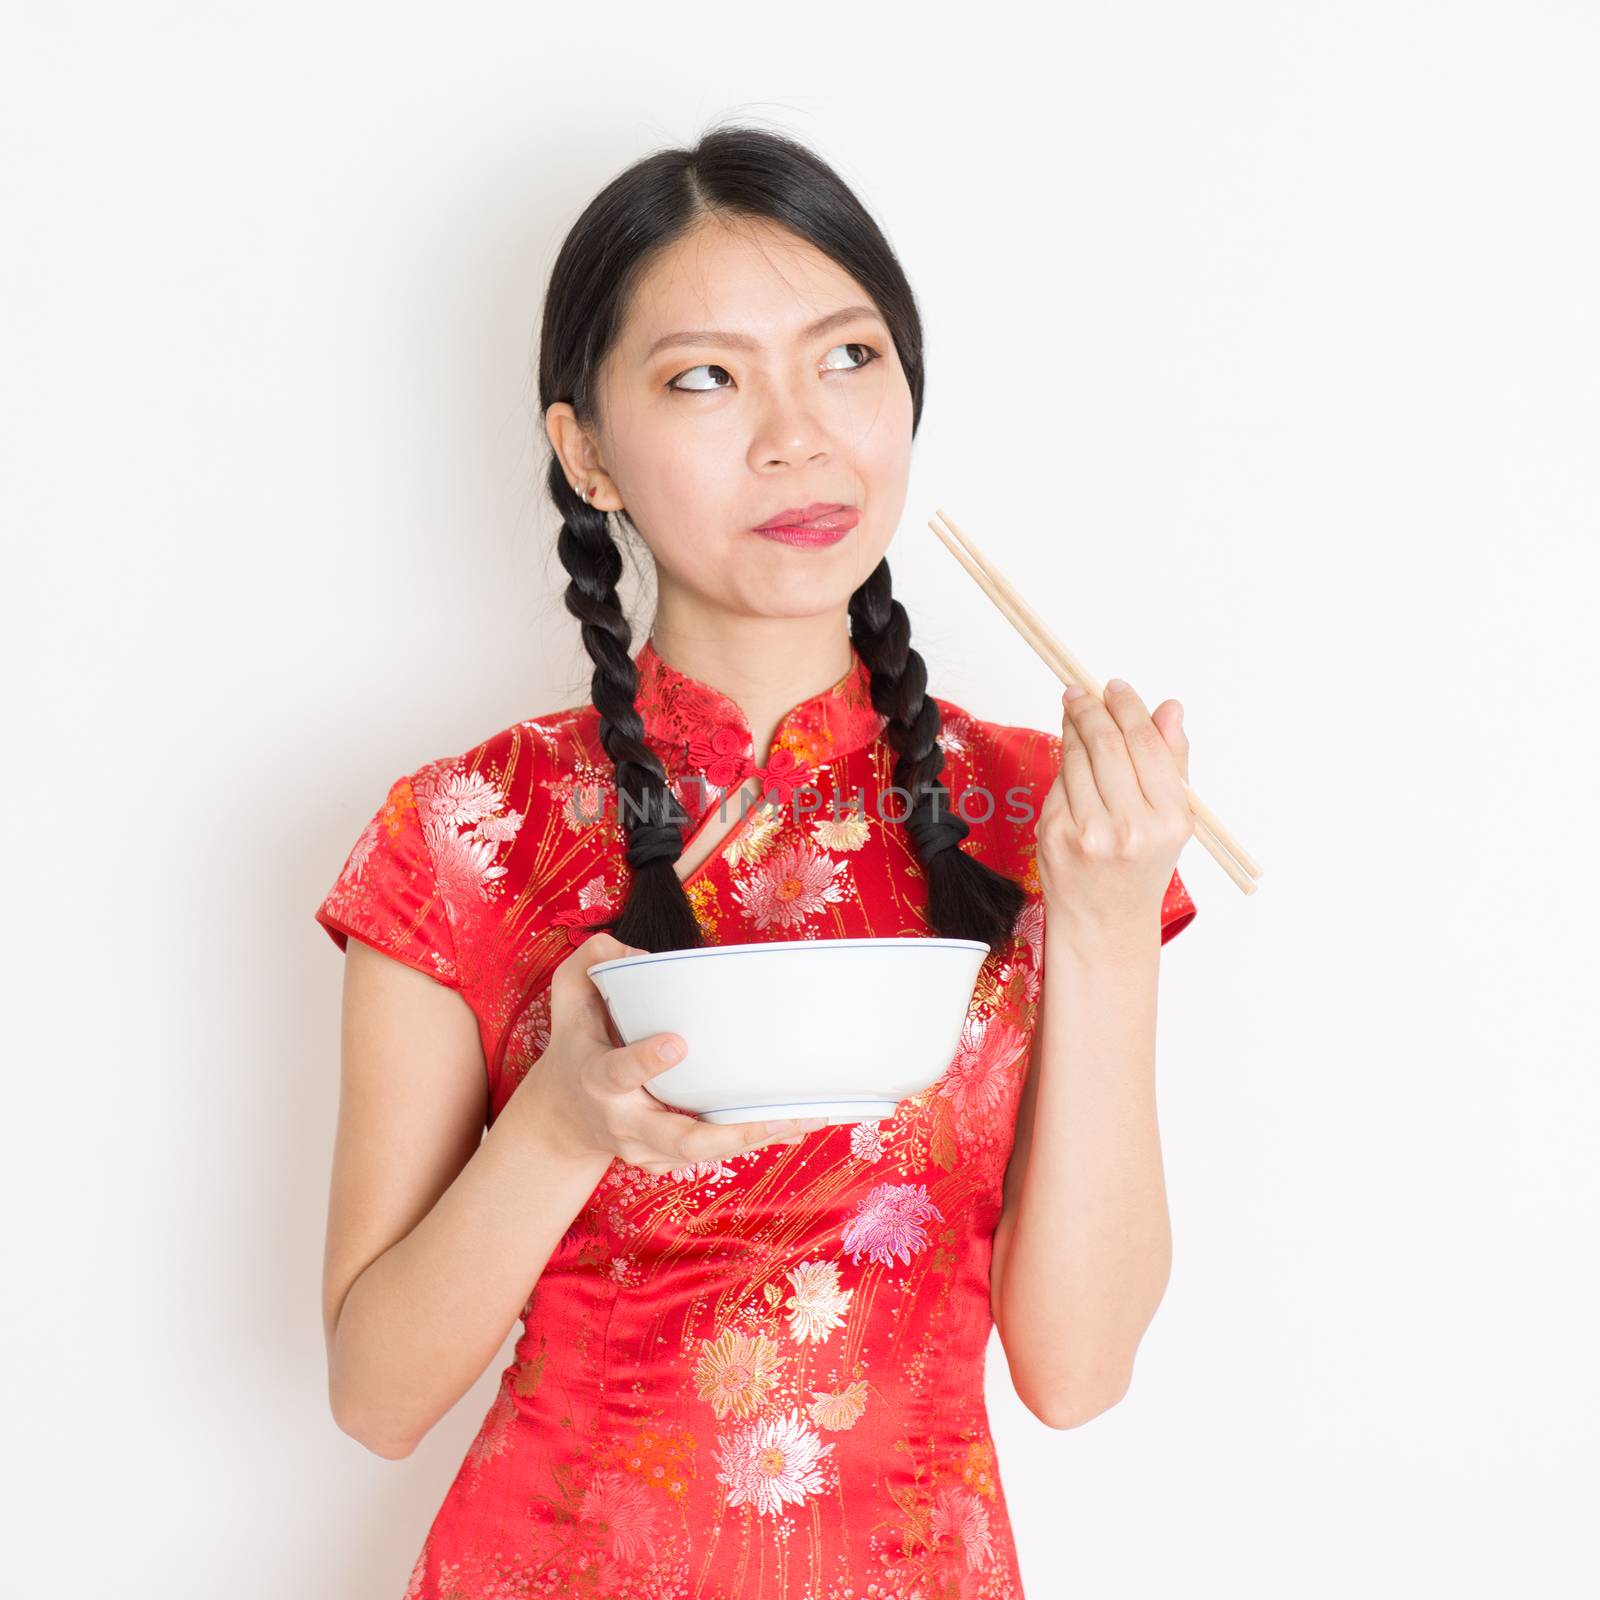 Oriental girl in red qipao eating with chopsticks by szefei